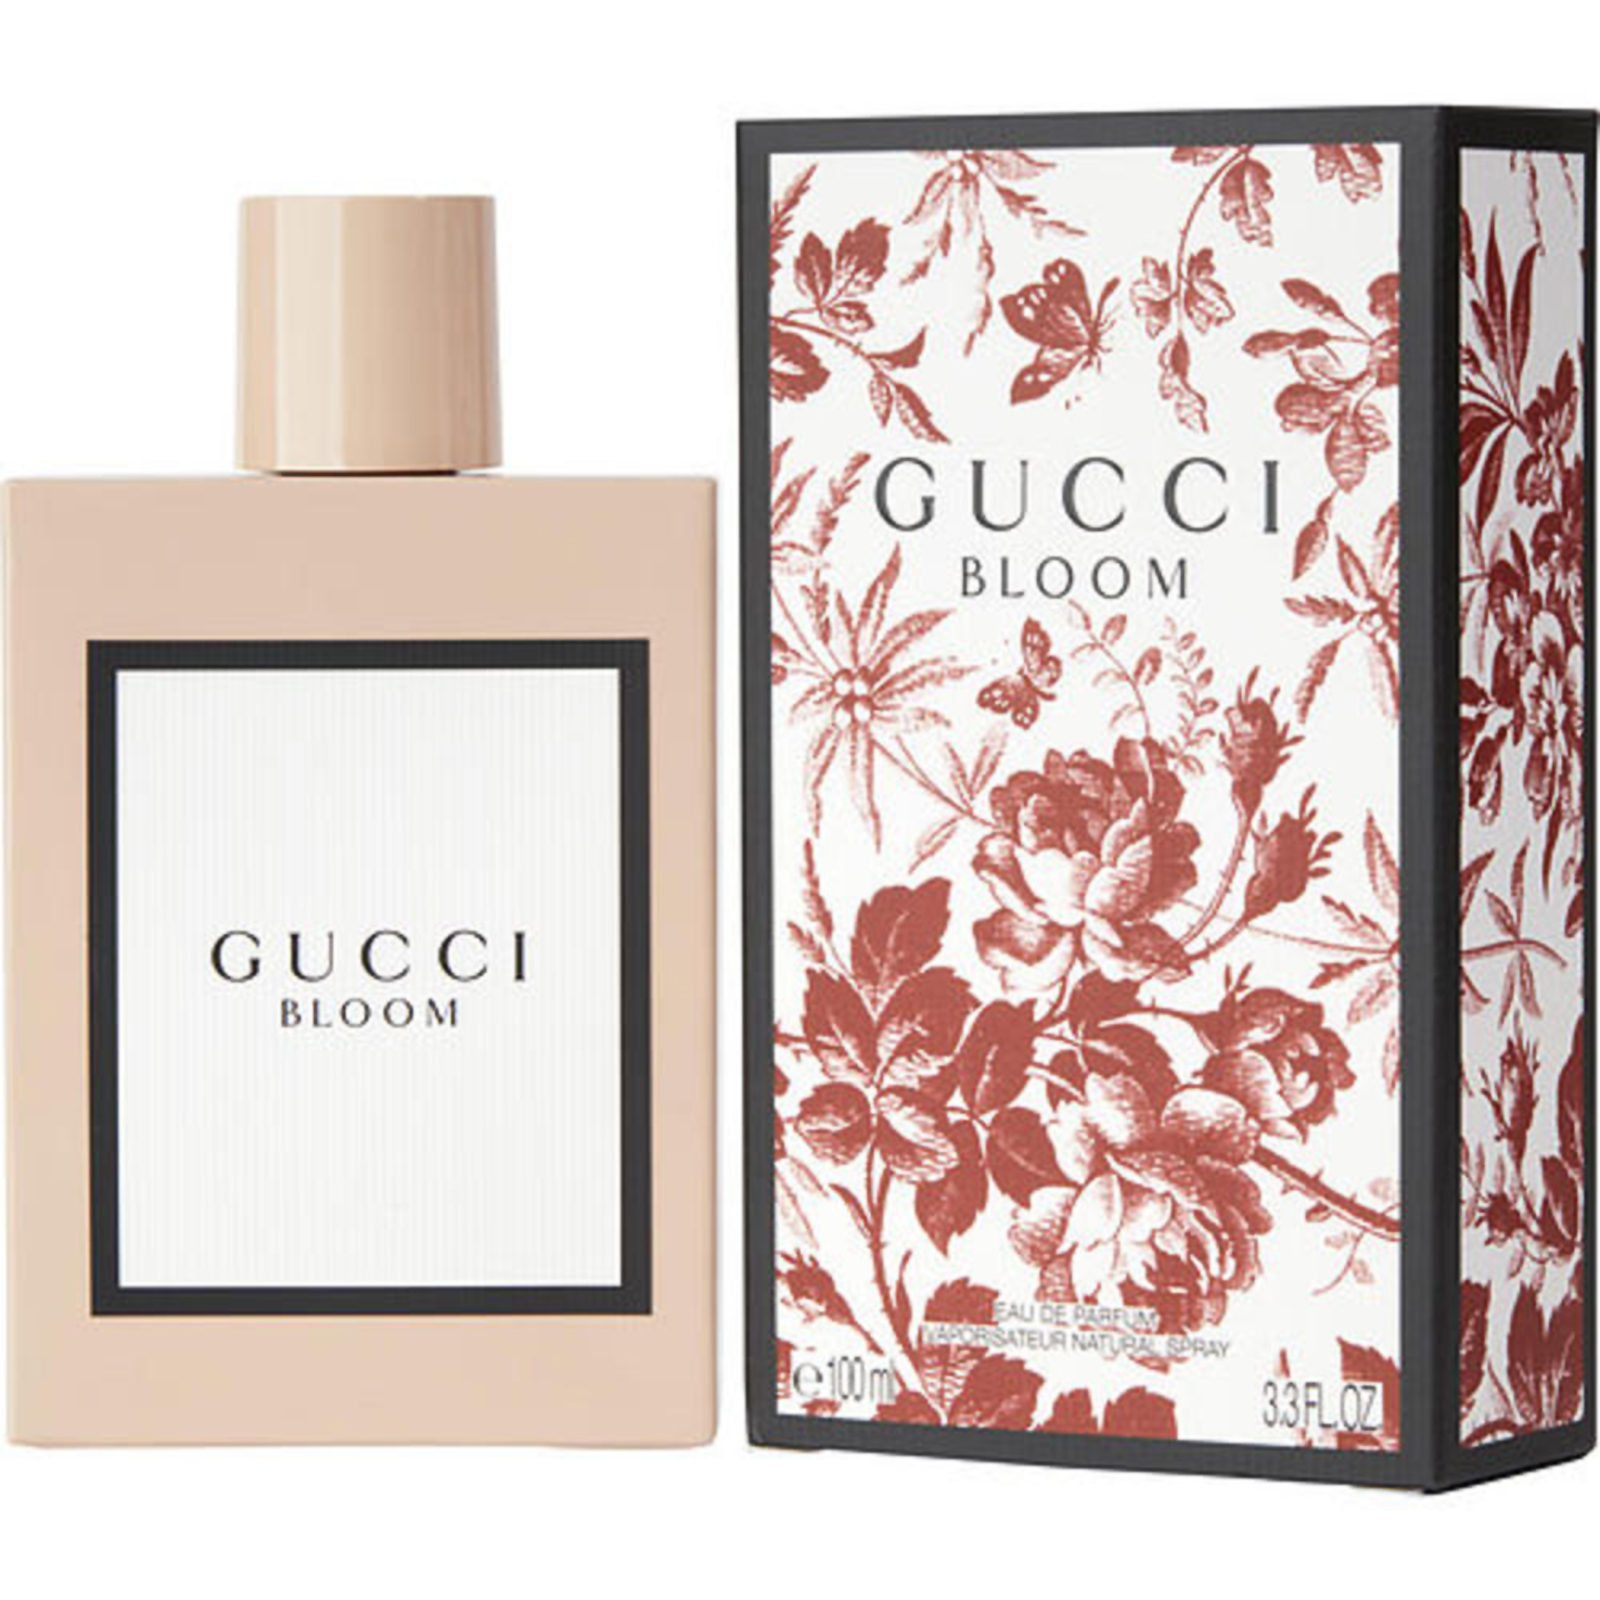 notes in gucci bloom